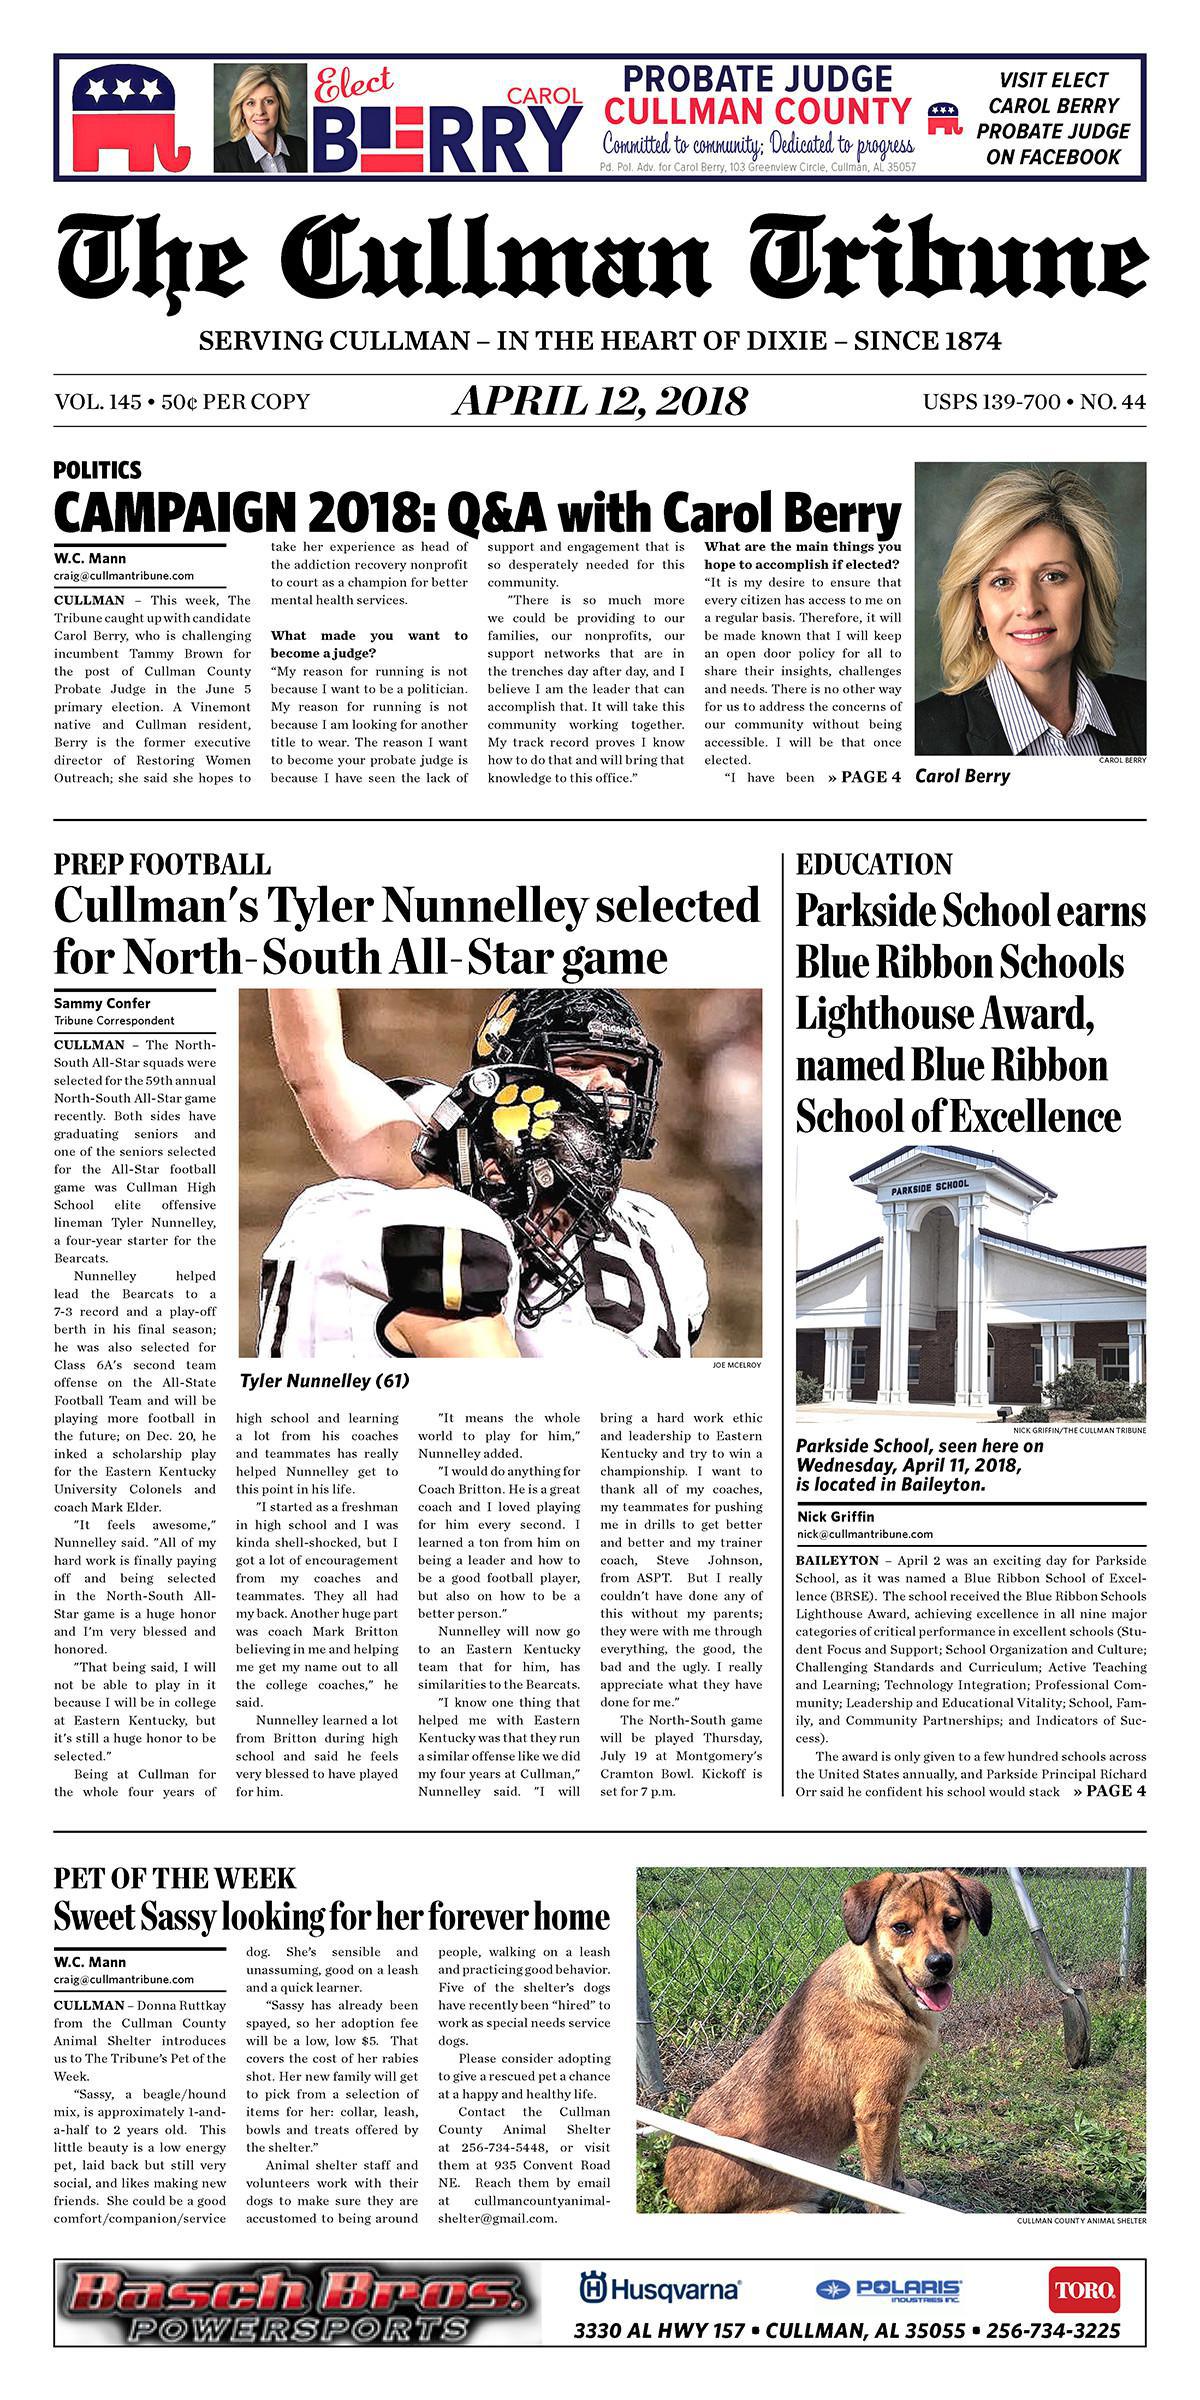 Good Morning Cullman! The 04-12-2018 edition of the Cullman Tribune is now ready to view